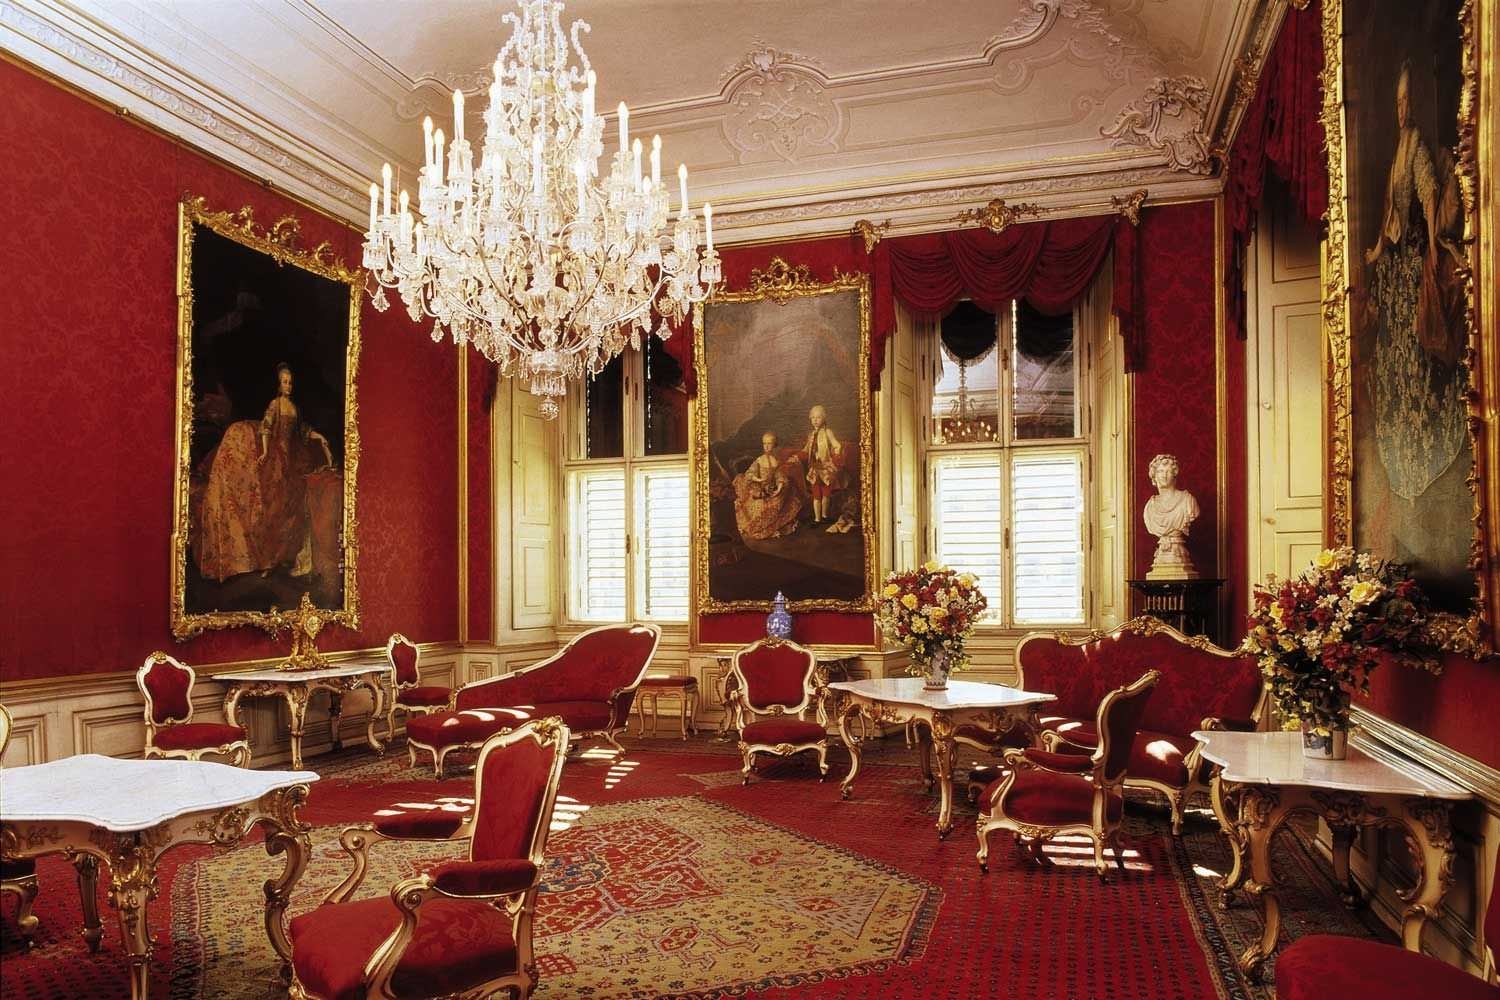 Amazing Room Inside The Schonbrunn Palace In Vienna, Austria